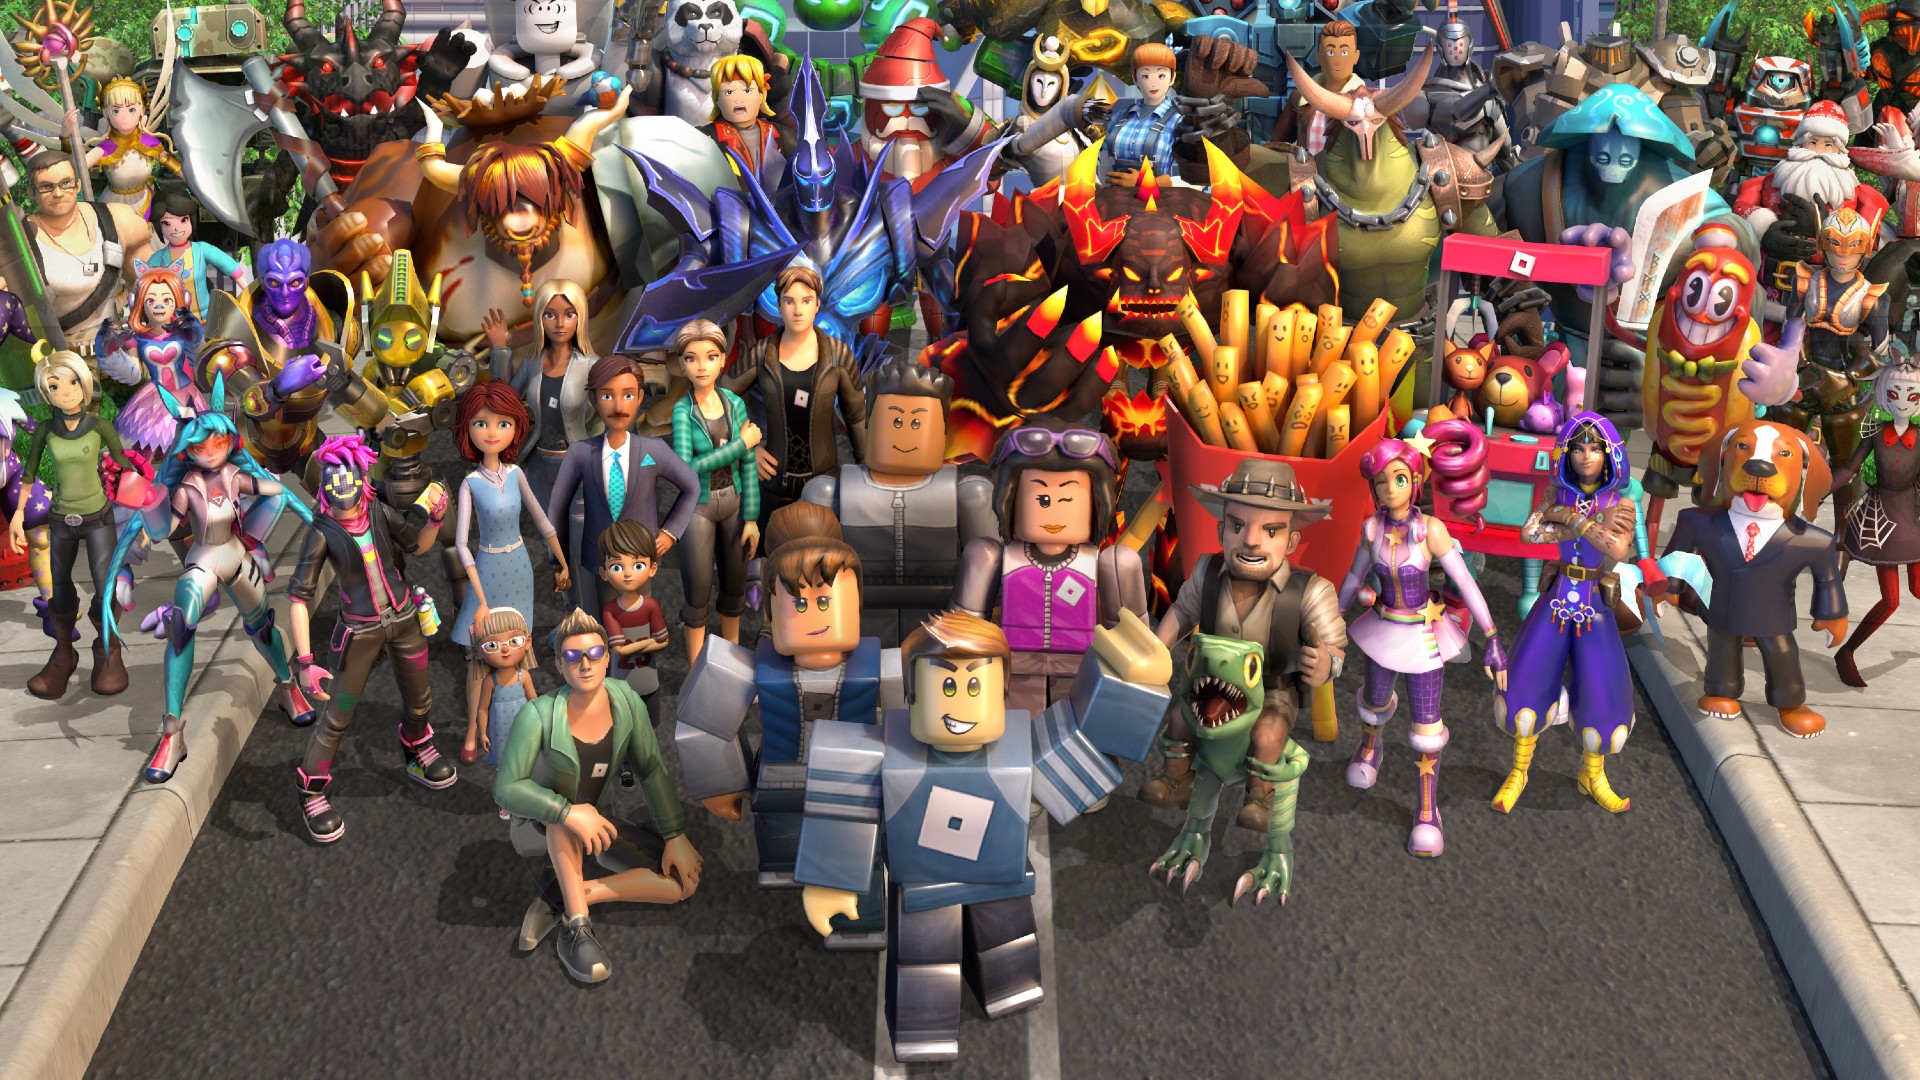 Roblox promo codes list February 2022 – how to redeem